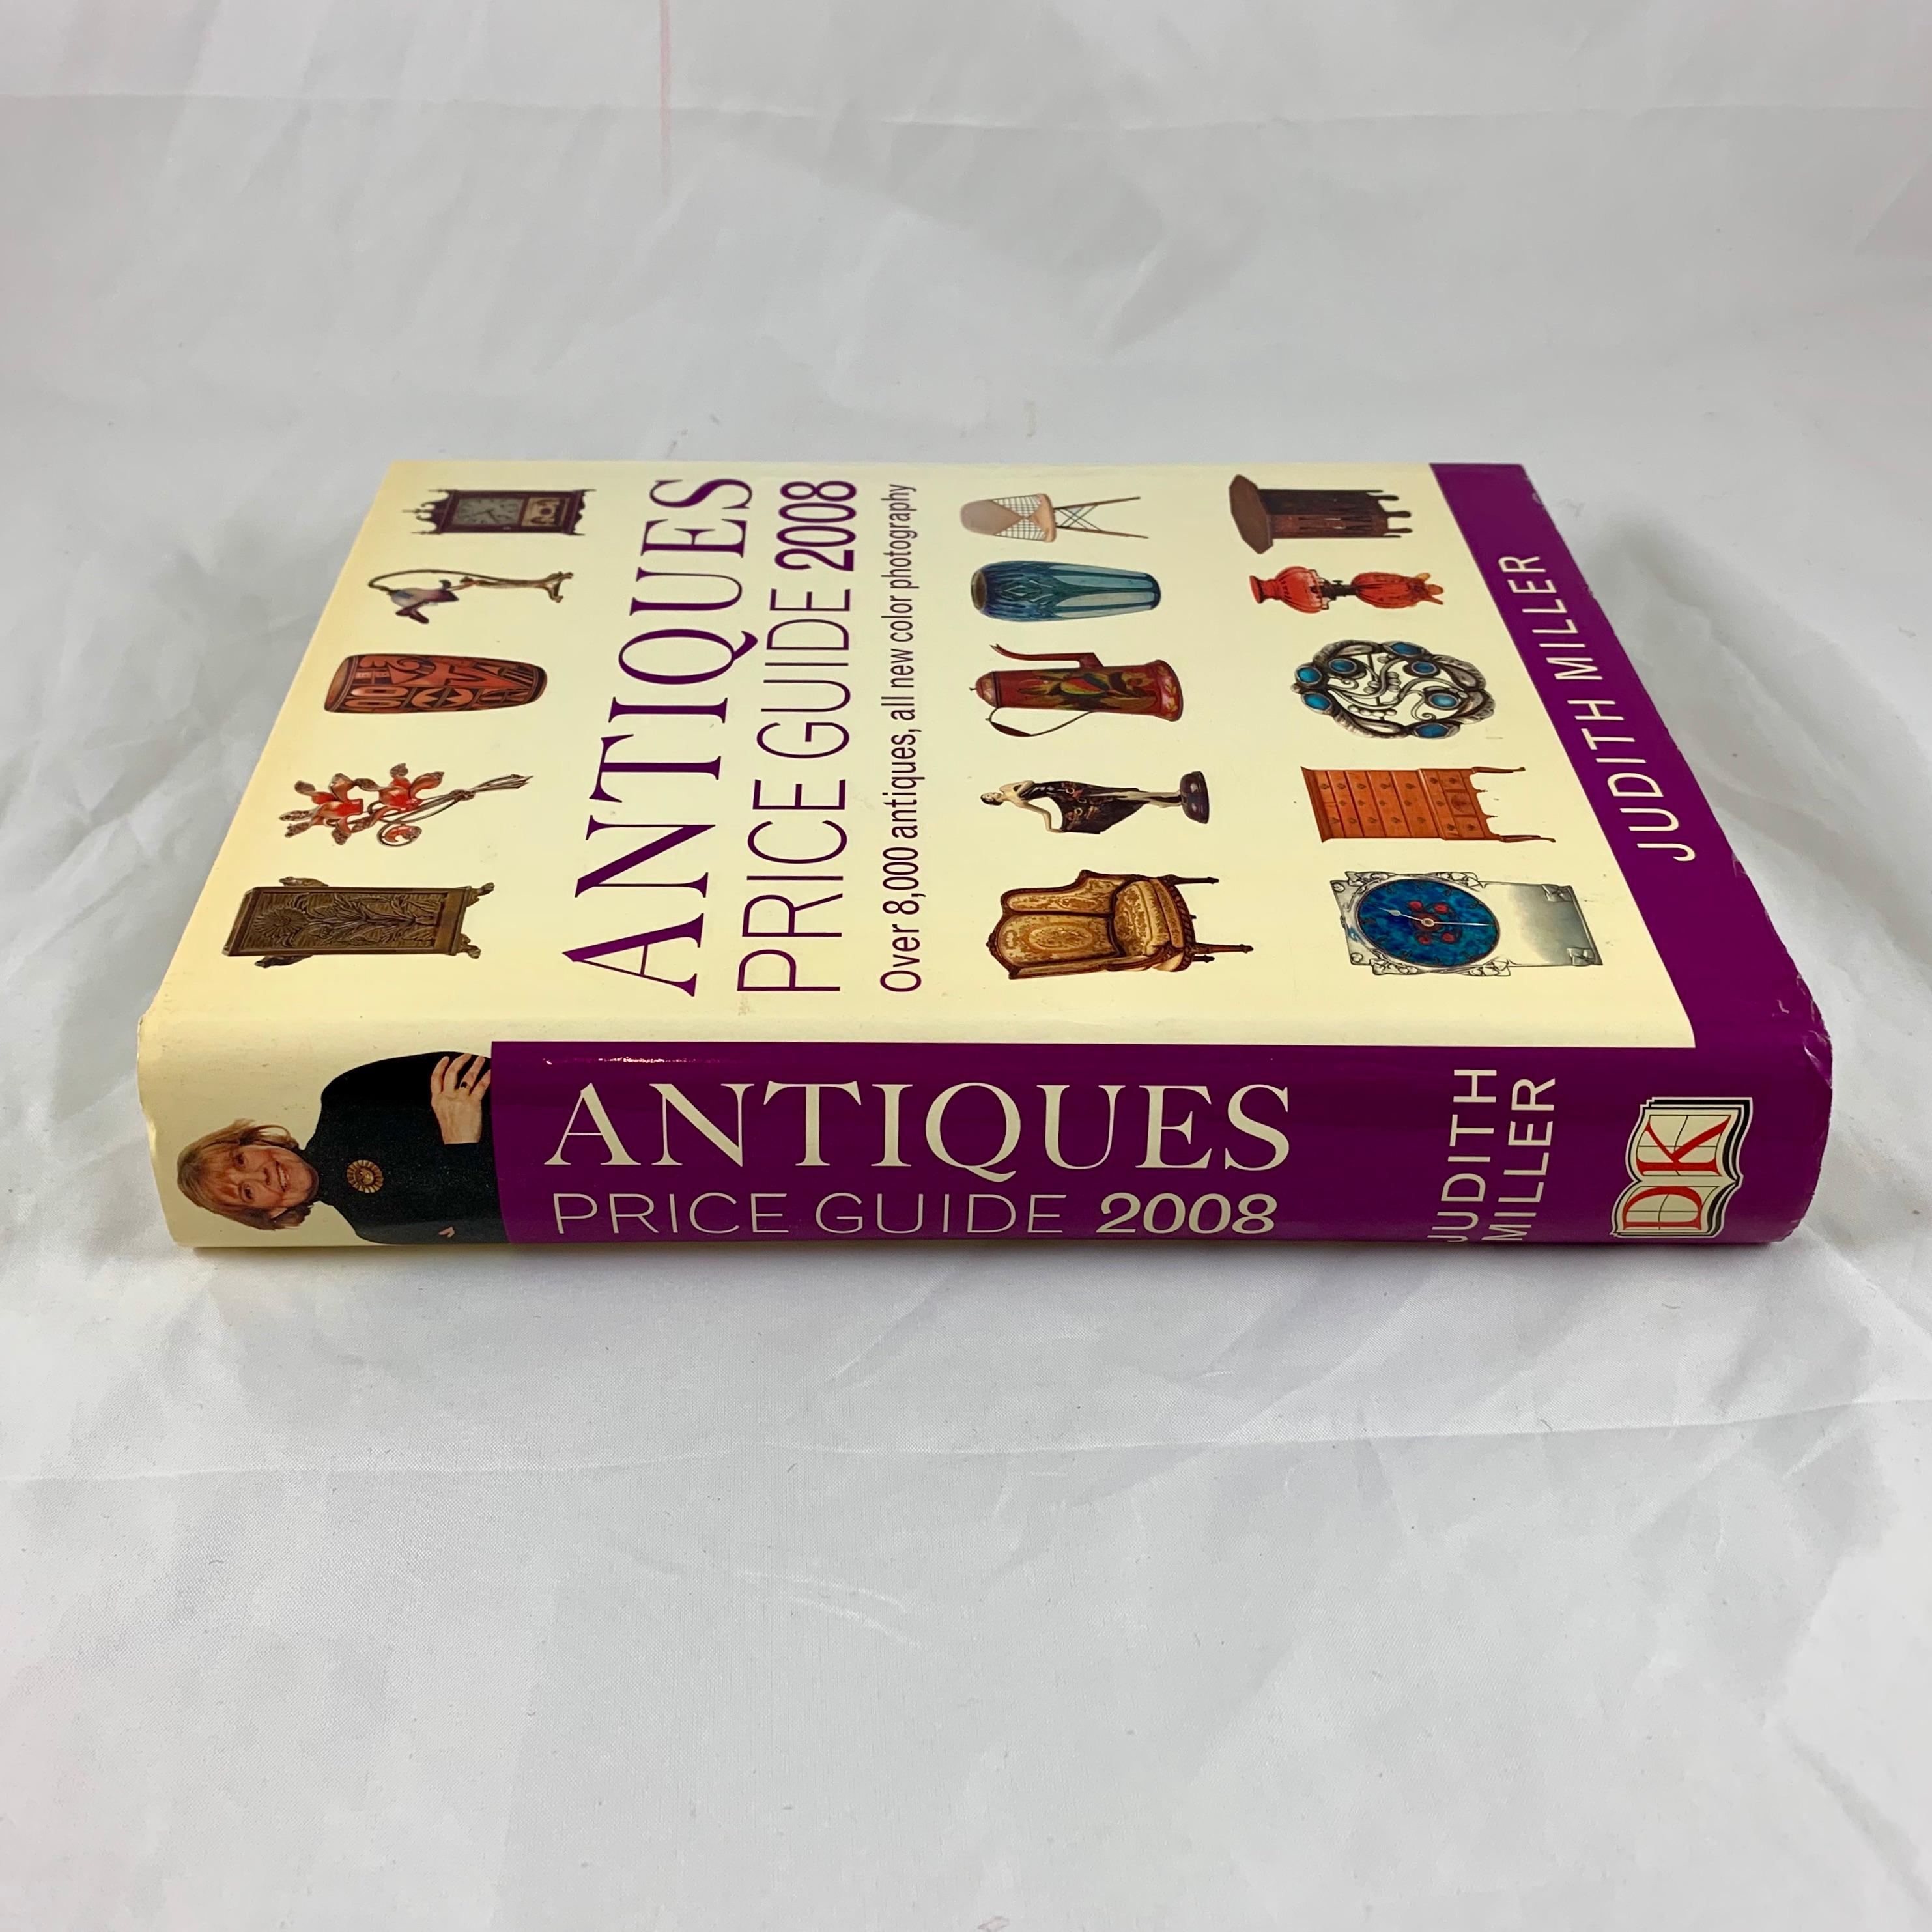 A hard bound price guide for antiques and collectibles, written by the UK antiques expert Judith Miller. 
 
The Antiques Price Guide 2008 highlights over 8,000 antiques in all color photography. 
This is an excellent, in-depth and informative